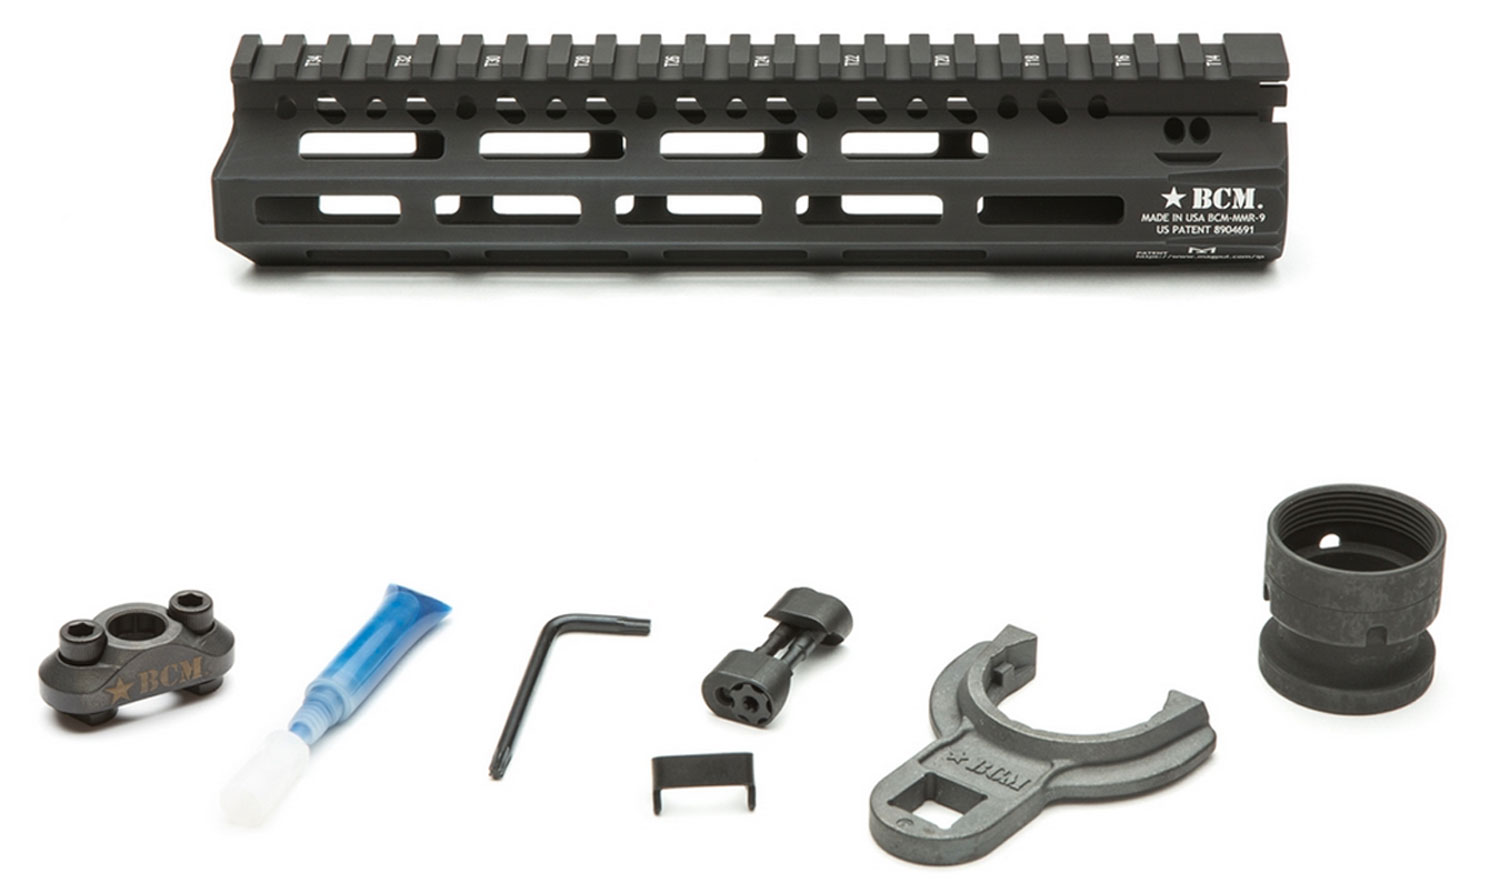 BCM MCMR9556BLK BCMGunfighter MCMR 9